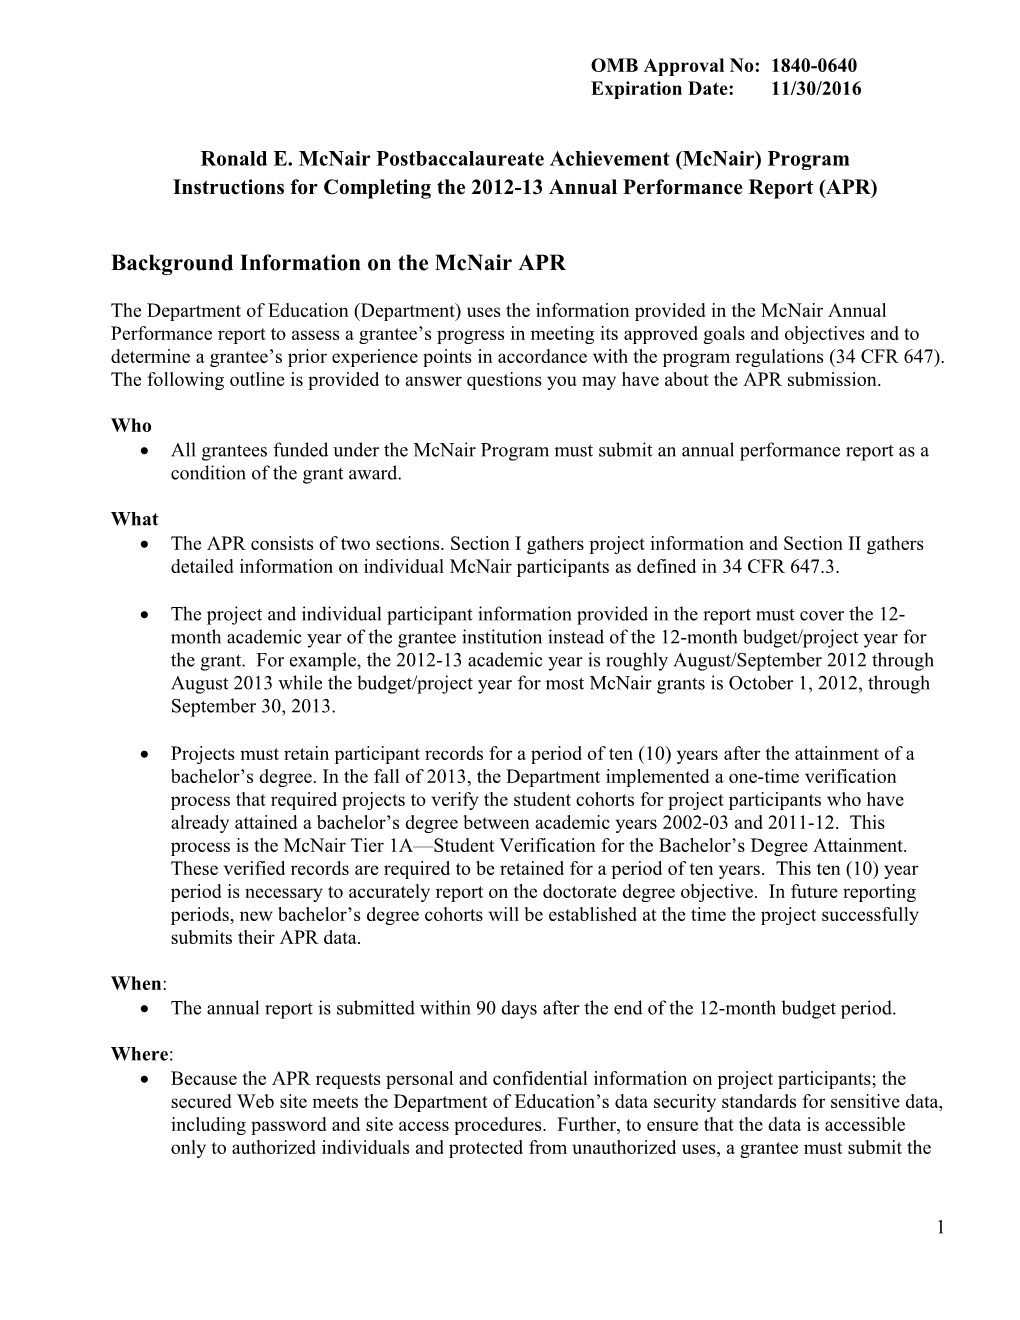 2012-2013 Annual Performance Report Instructions for the Ronald Mcnair Program (MS Word)